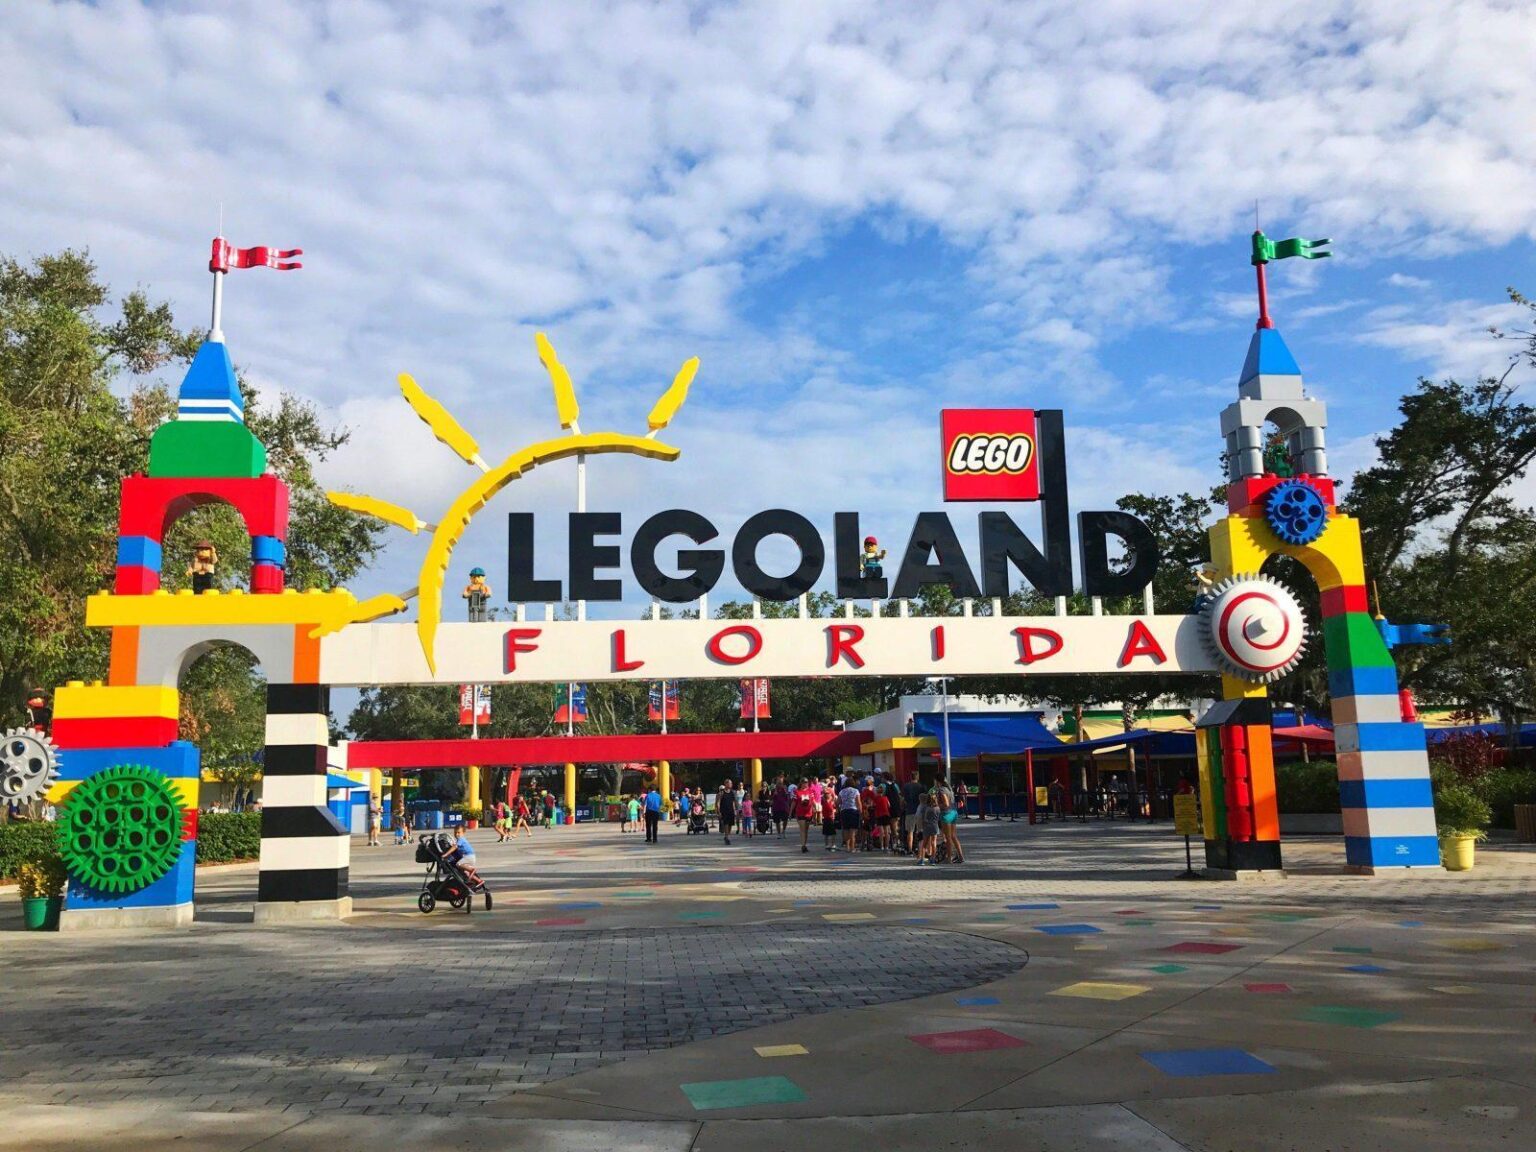 Legoland Florida Tips for the best trip ever!